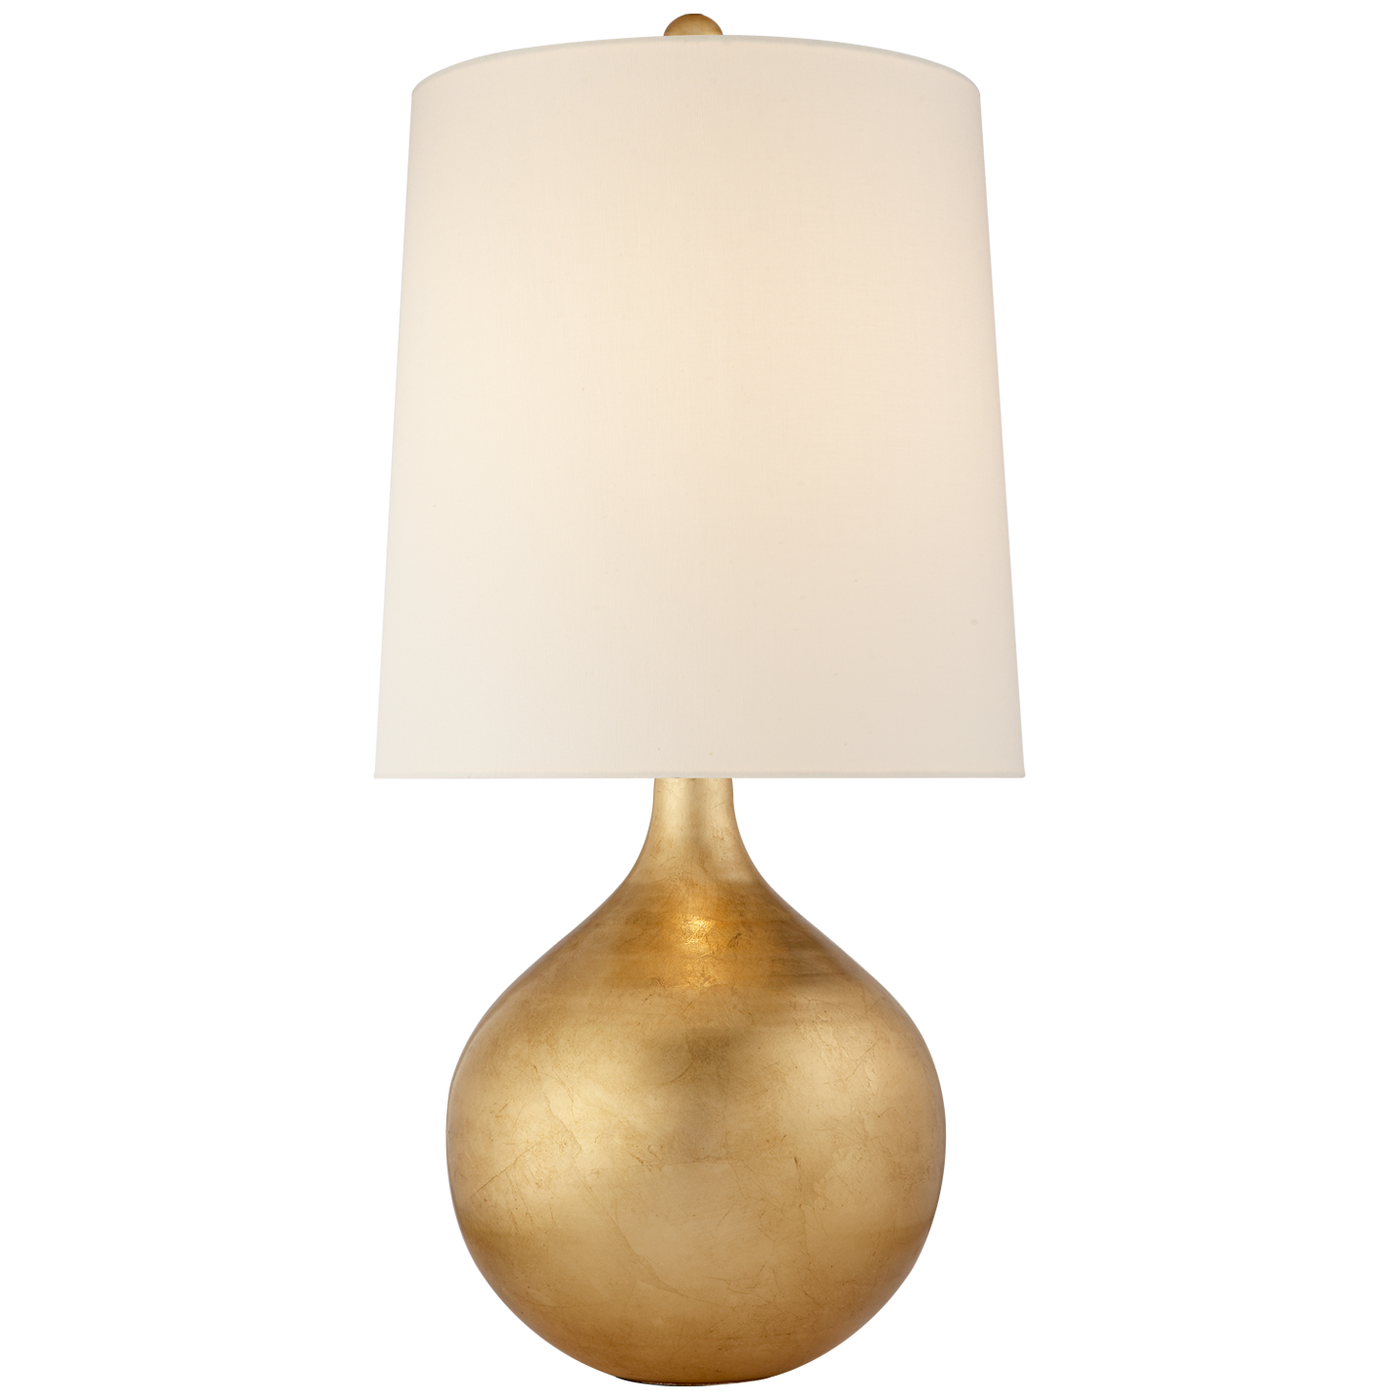 TABLE LAMP ORB (Available in 2 Finishes)